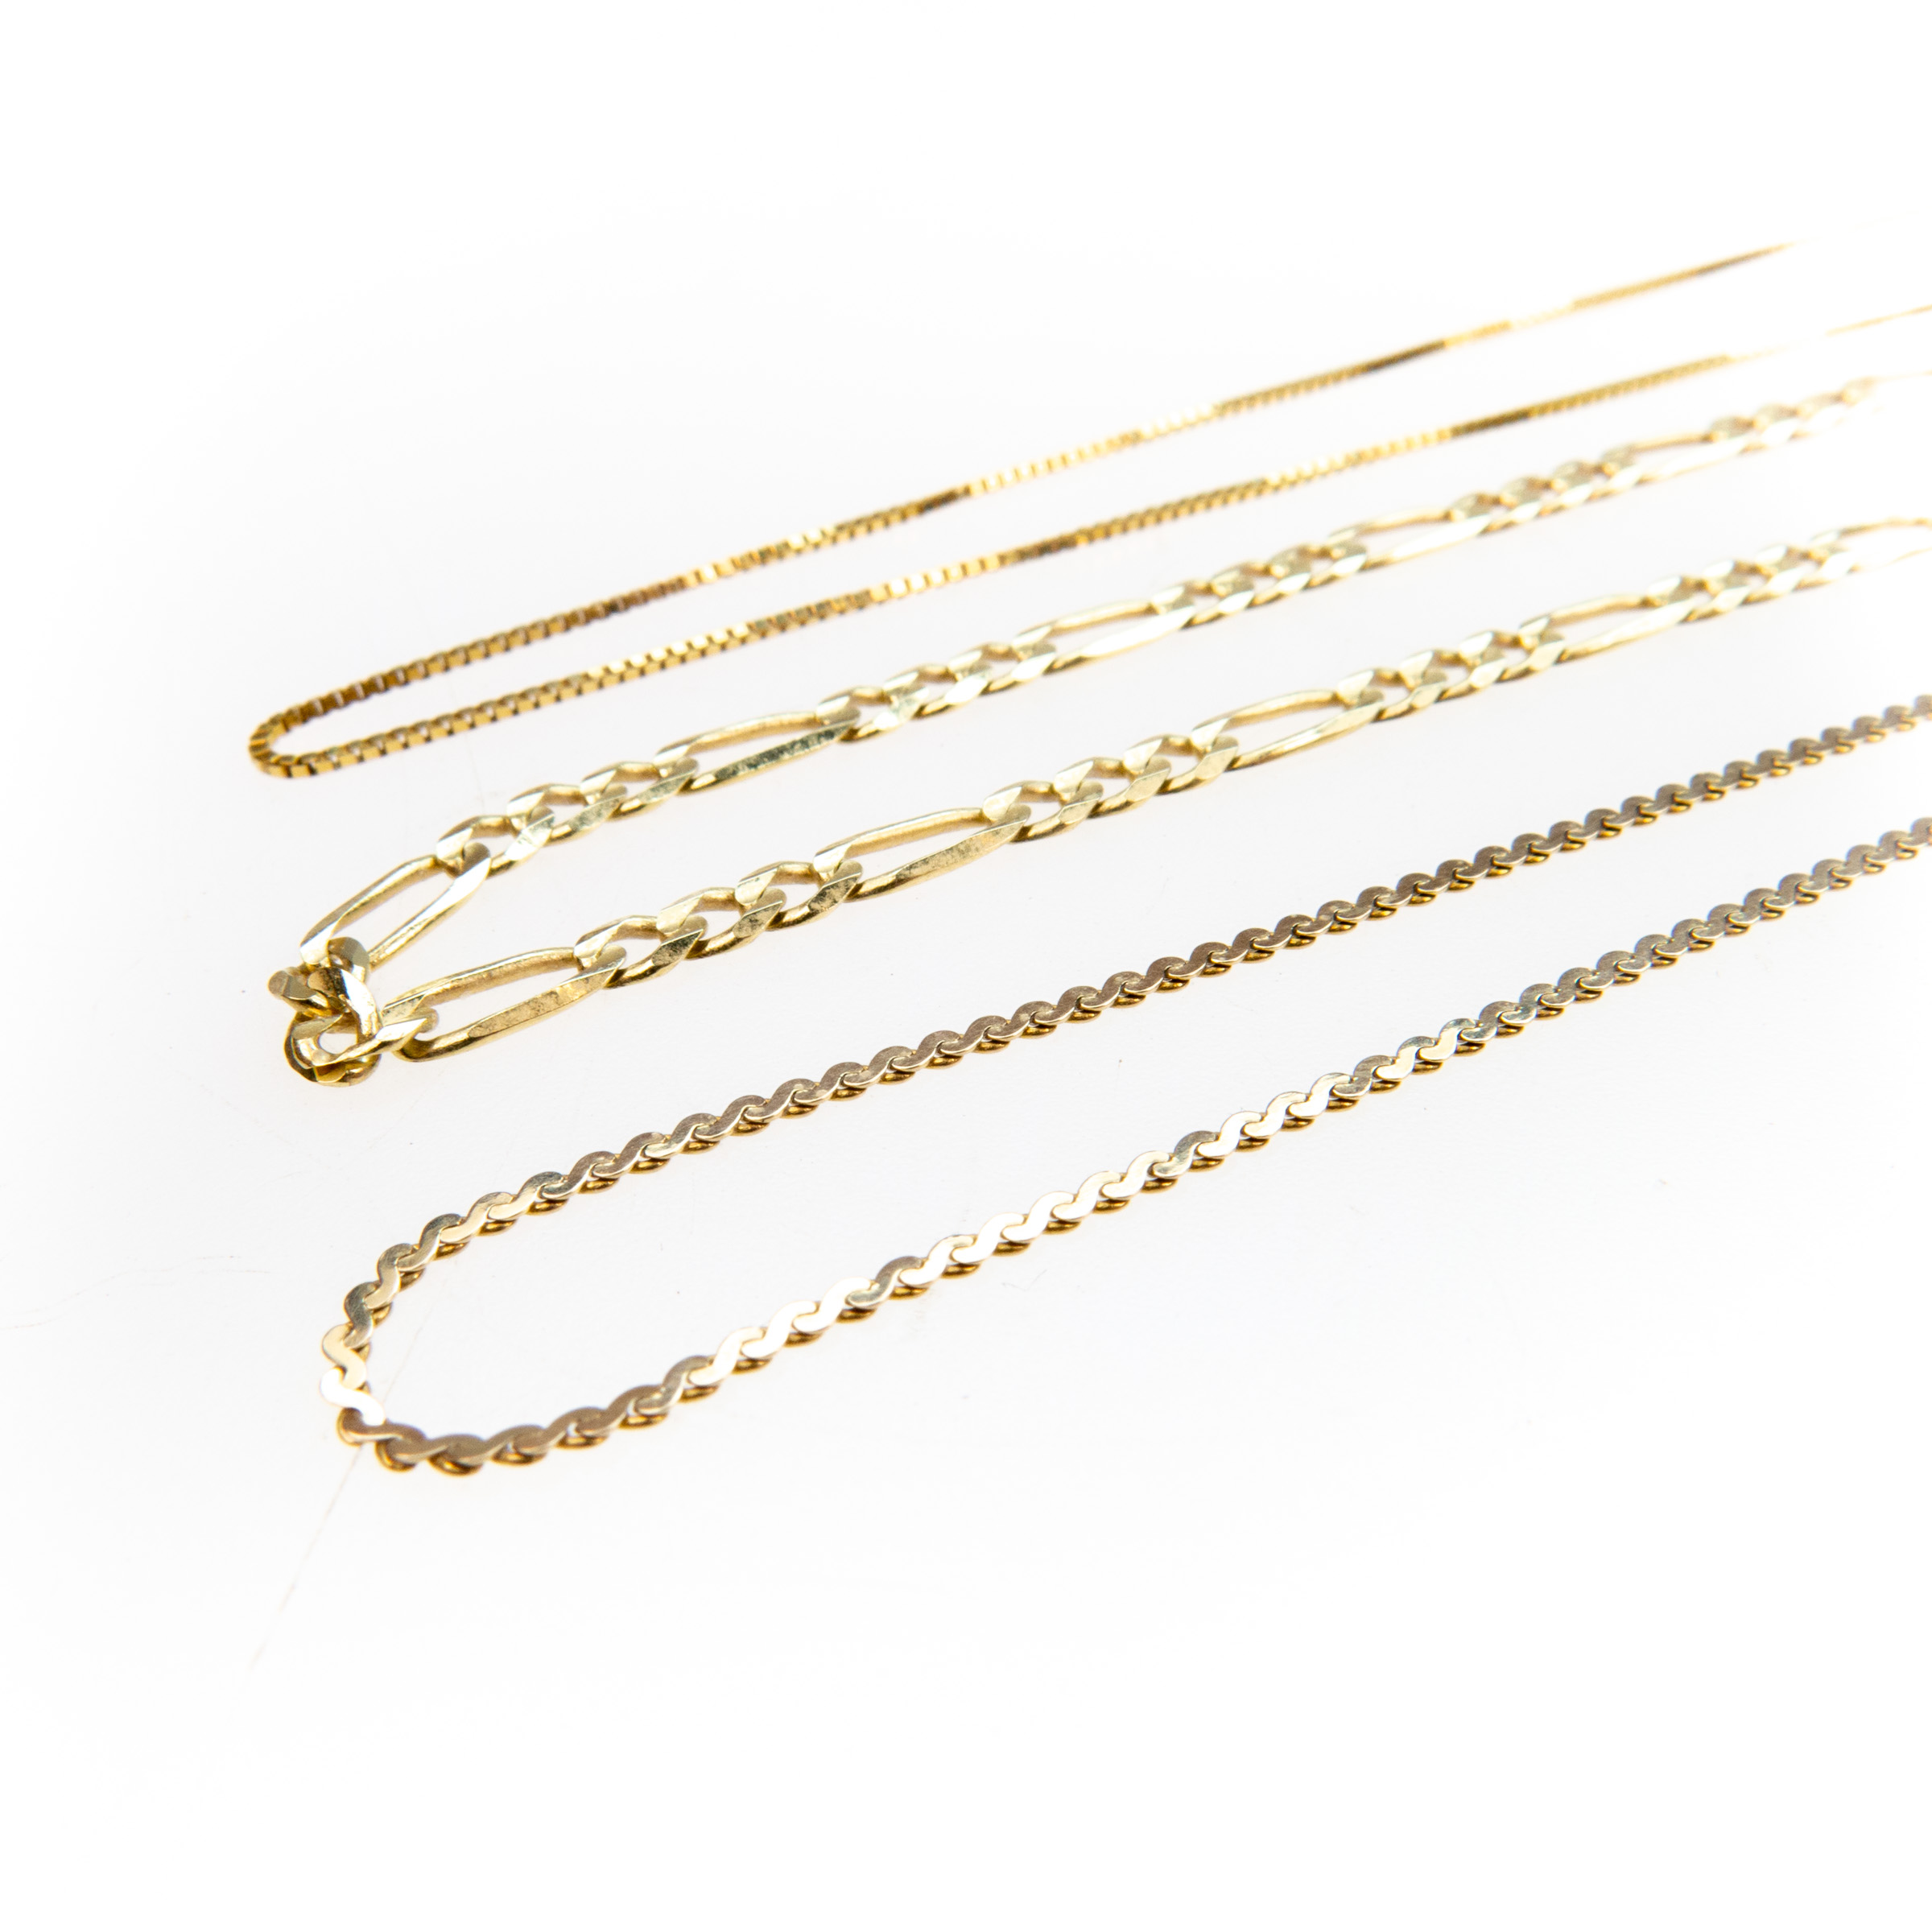 3 X 14K Yellow Gold Necklaces